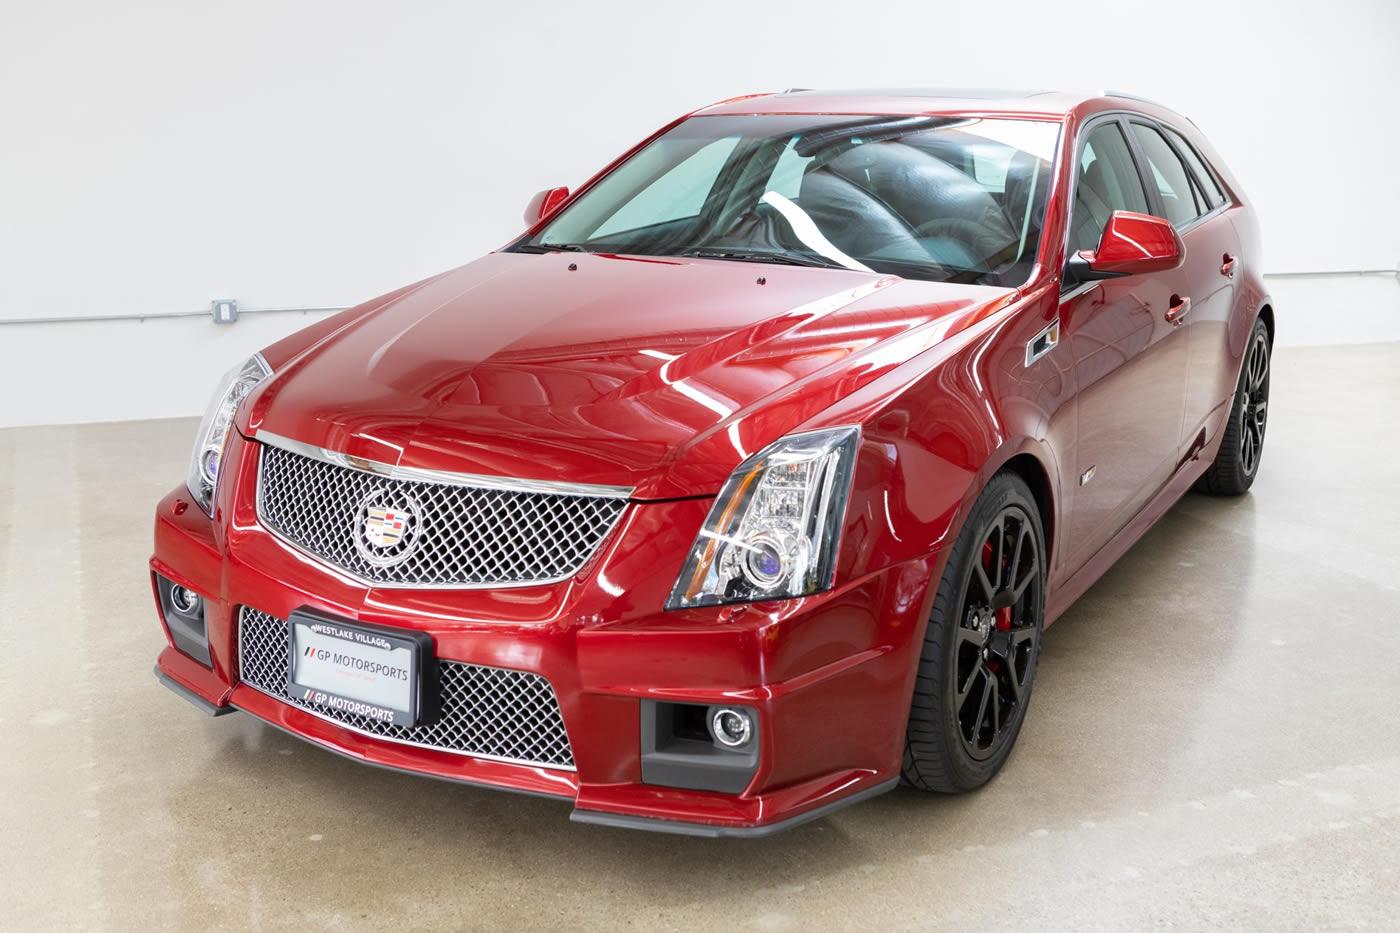 https://www.cadillacvnet.com/forums/media/2014-cadillac-cts-v-wagon-in-red-obsession-tintcoat.2718/full